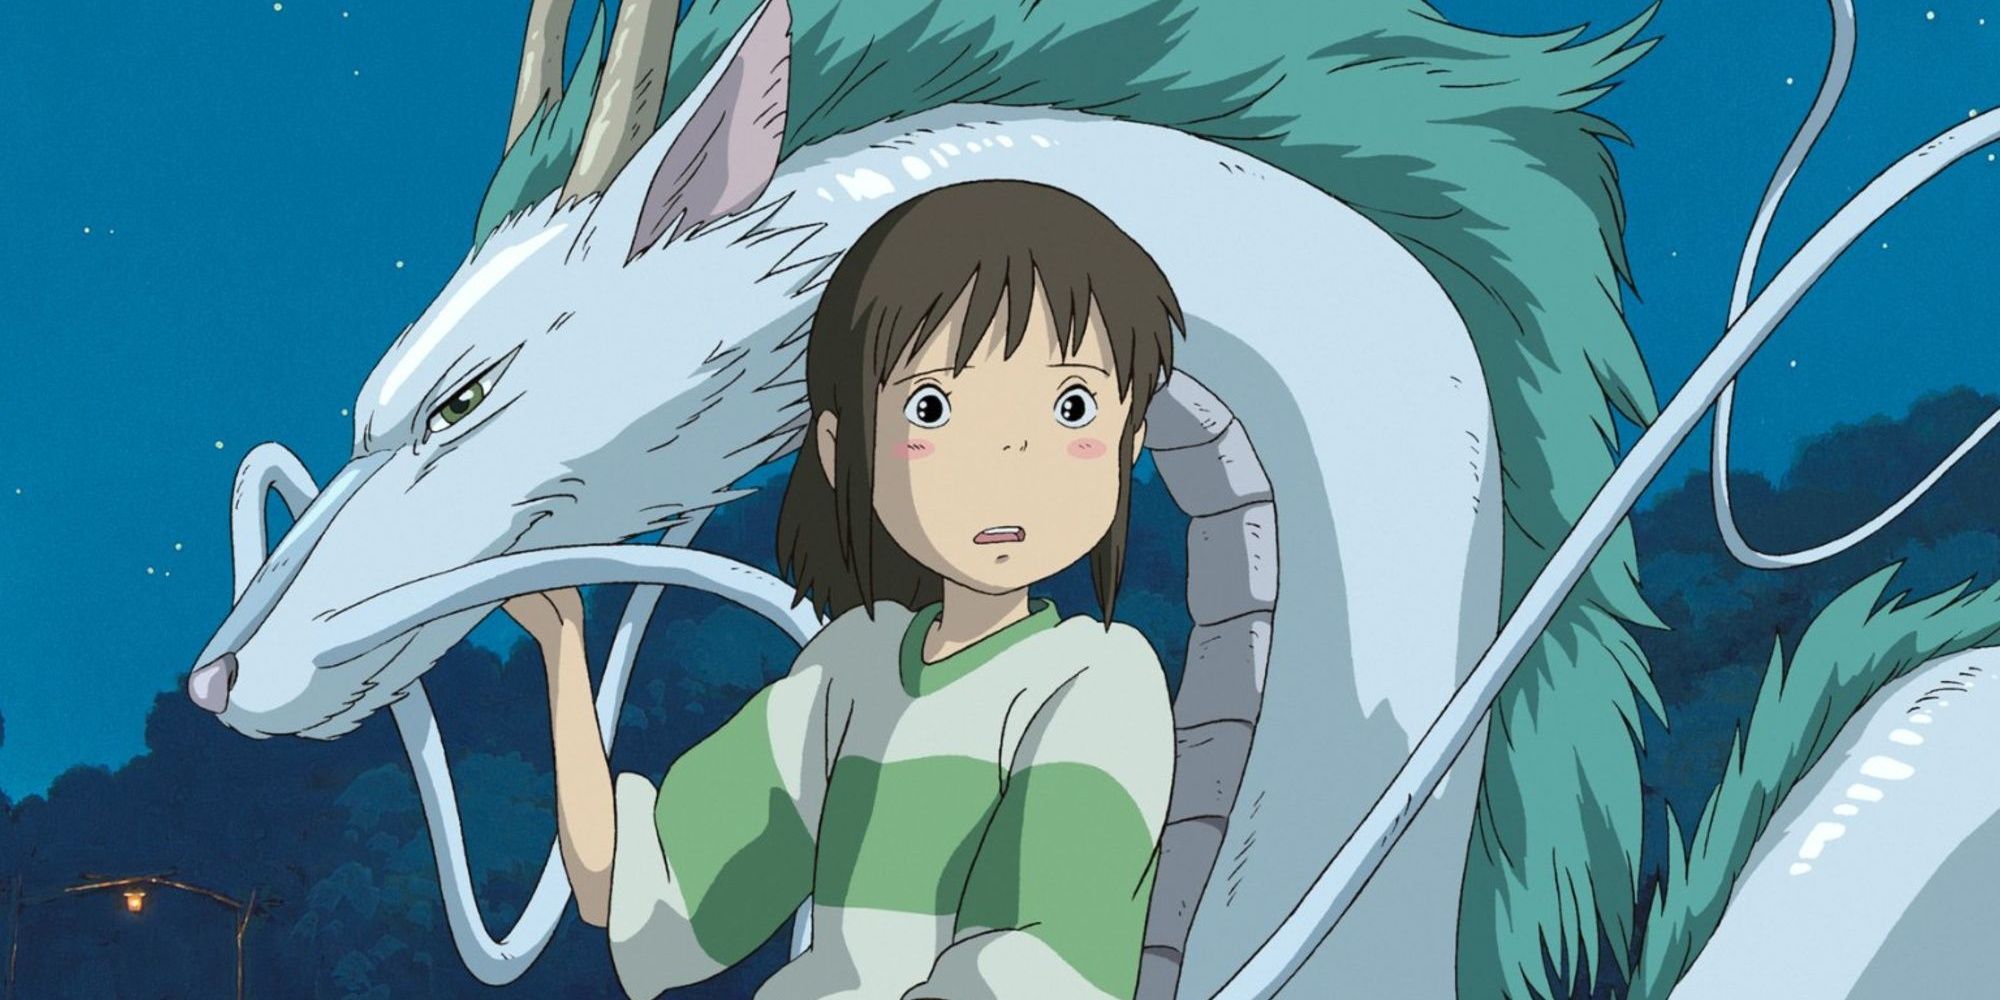 10 BehindTheScenes Facts About Spirited Away